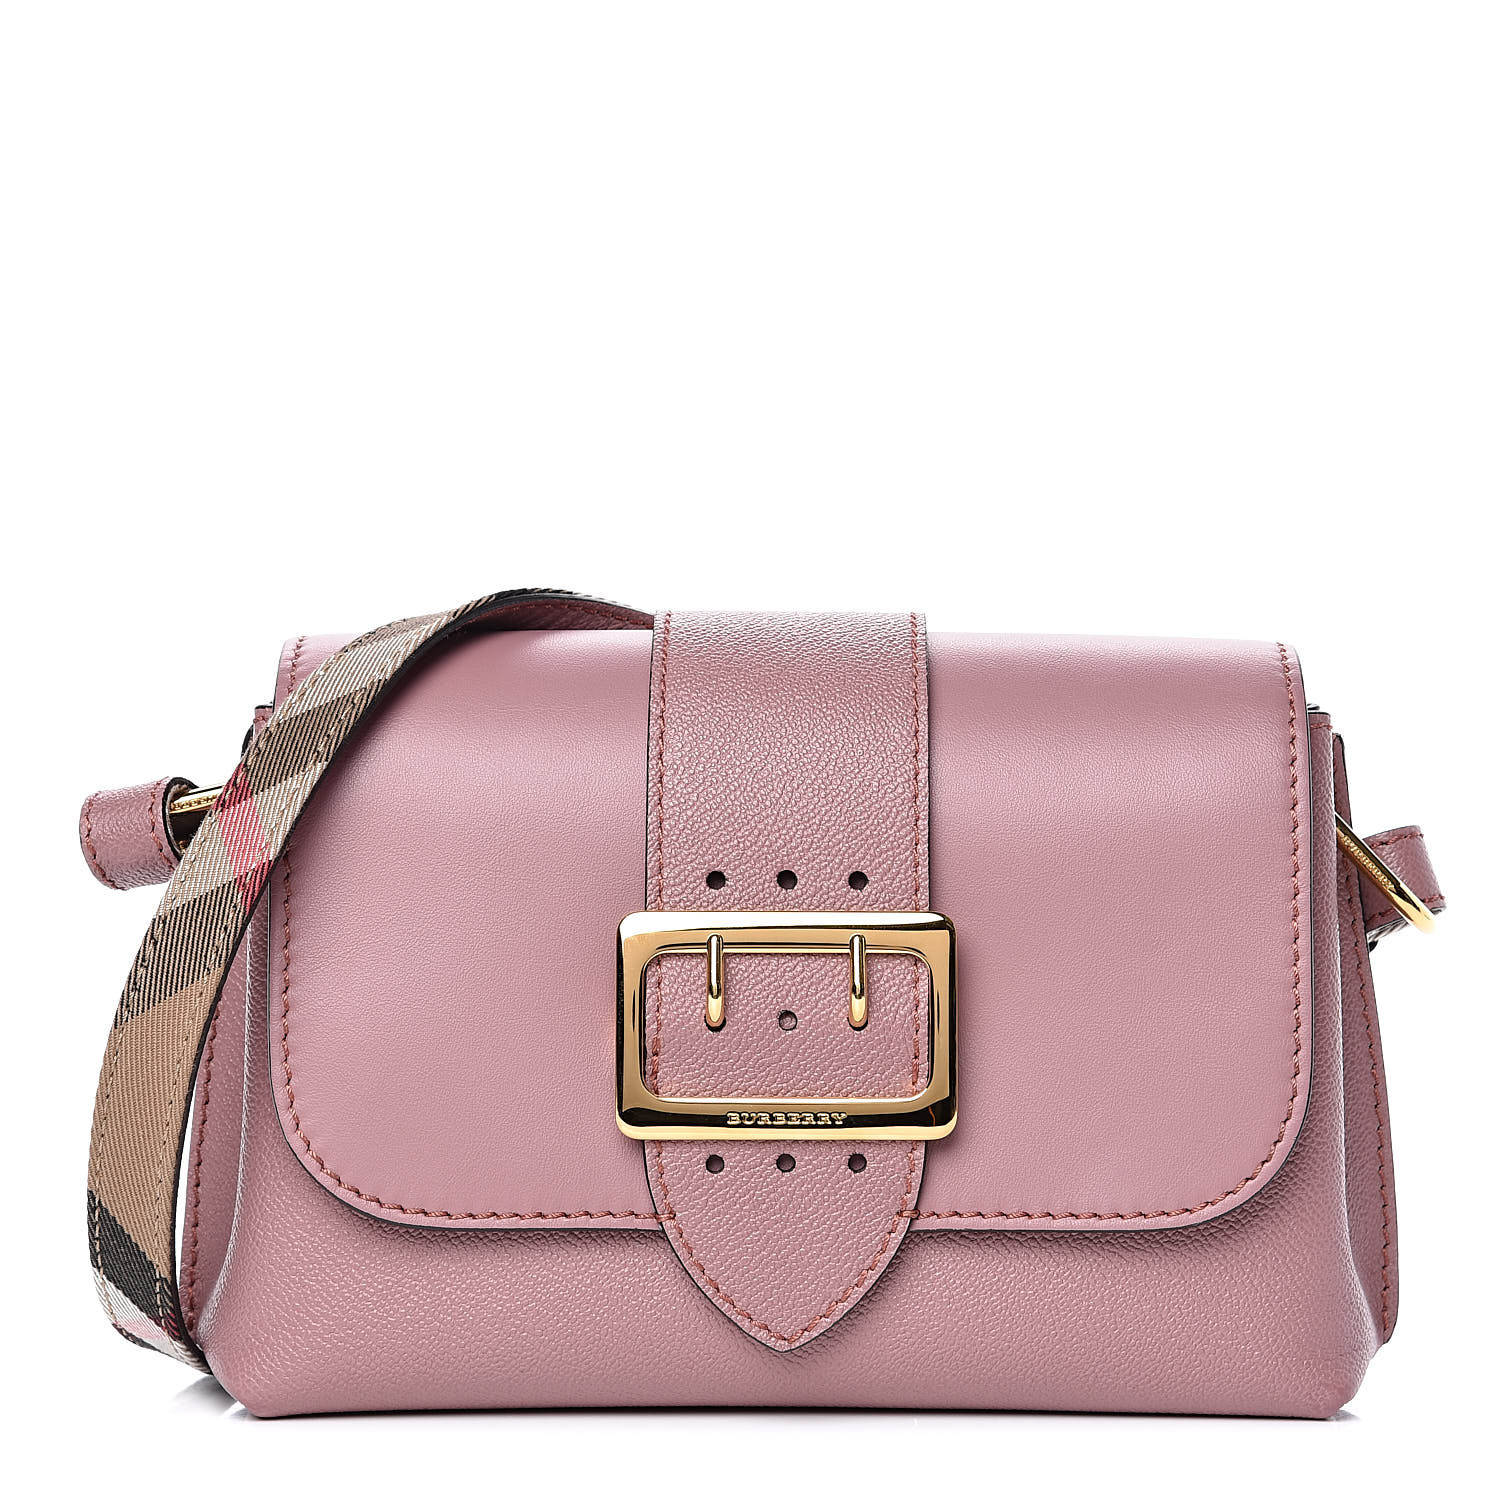 burberry dusty pink